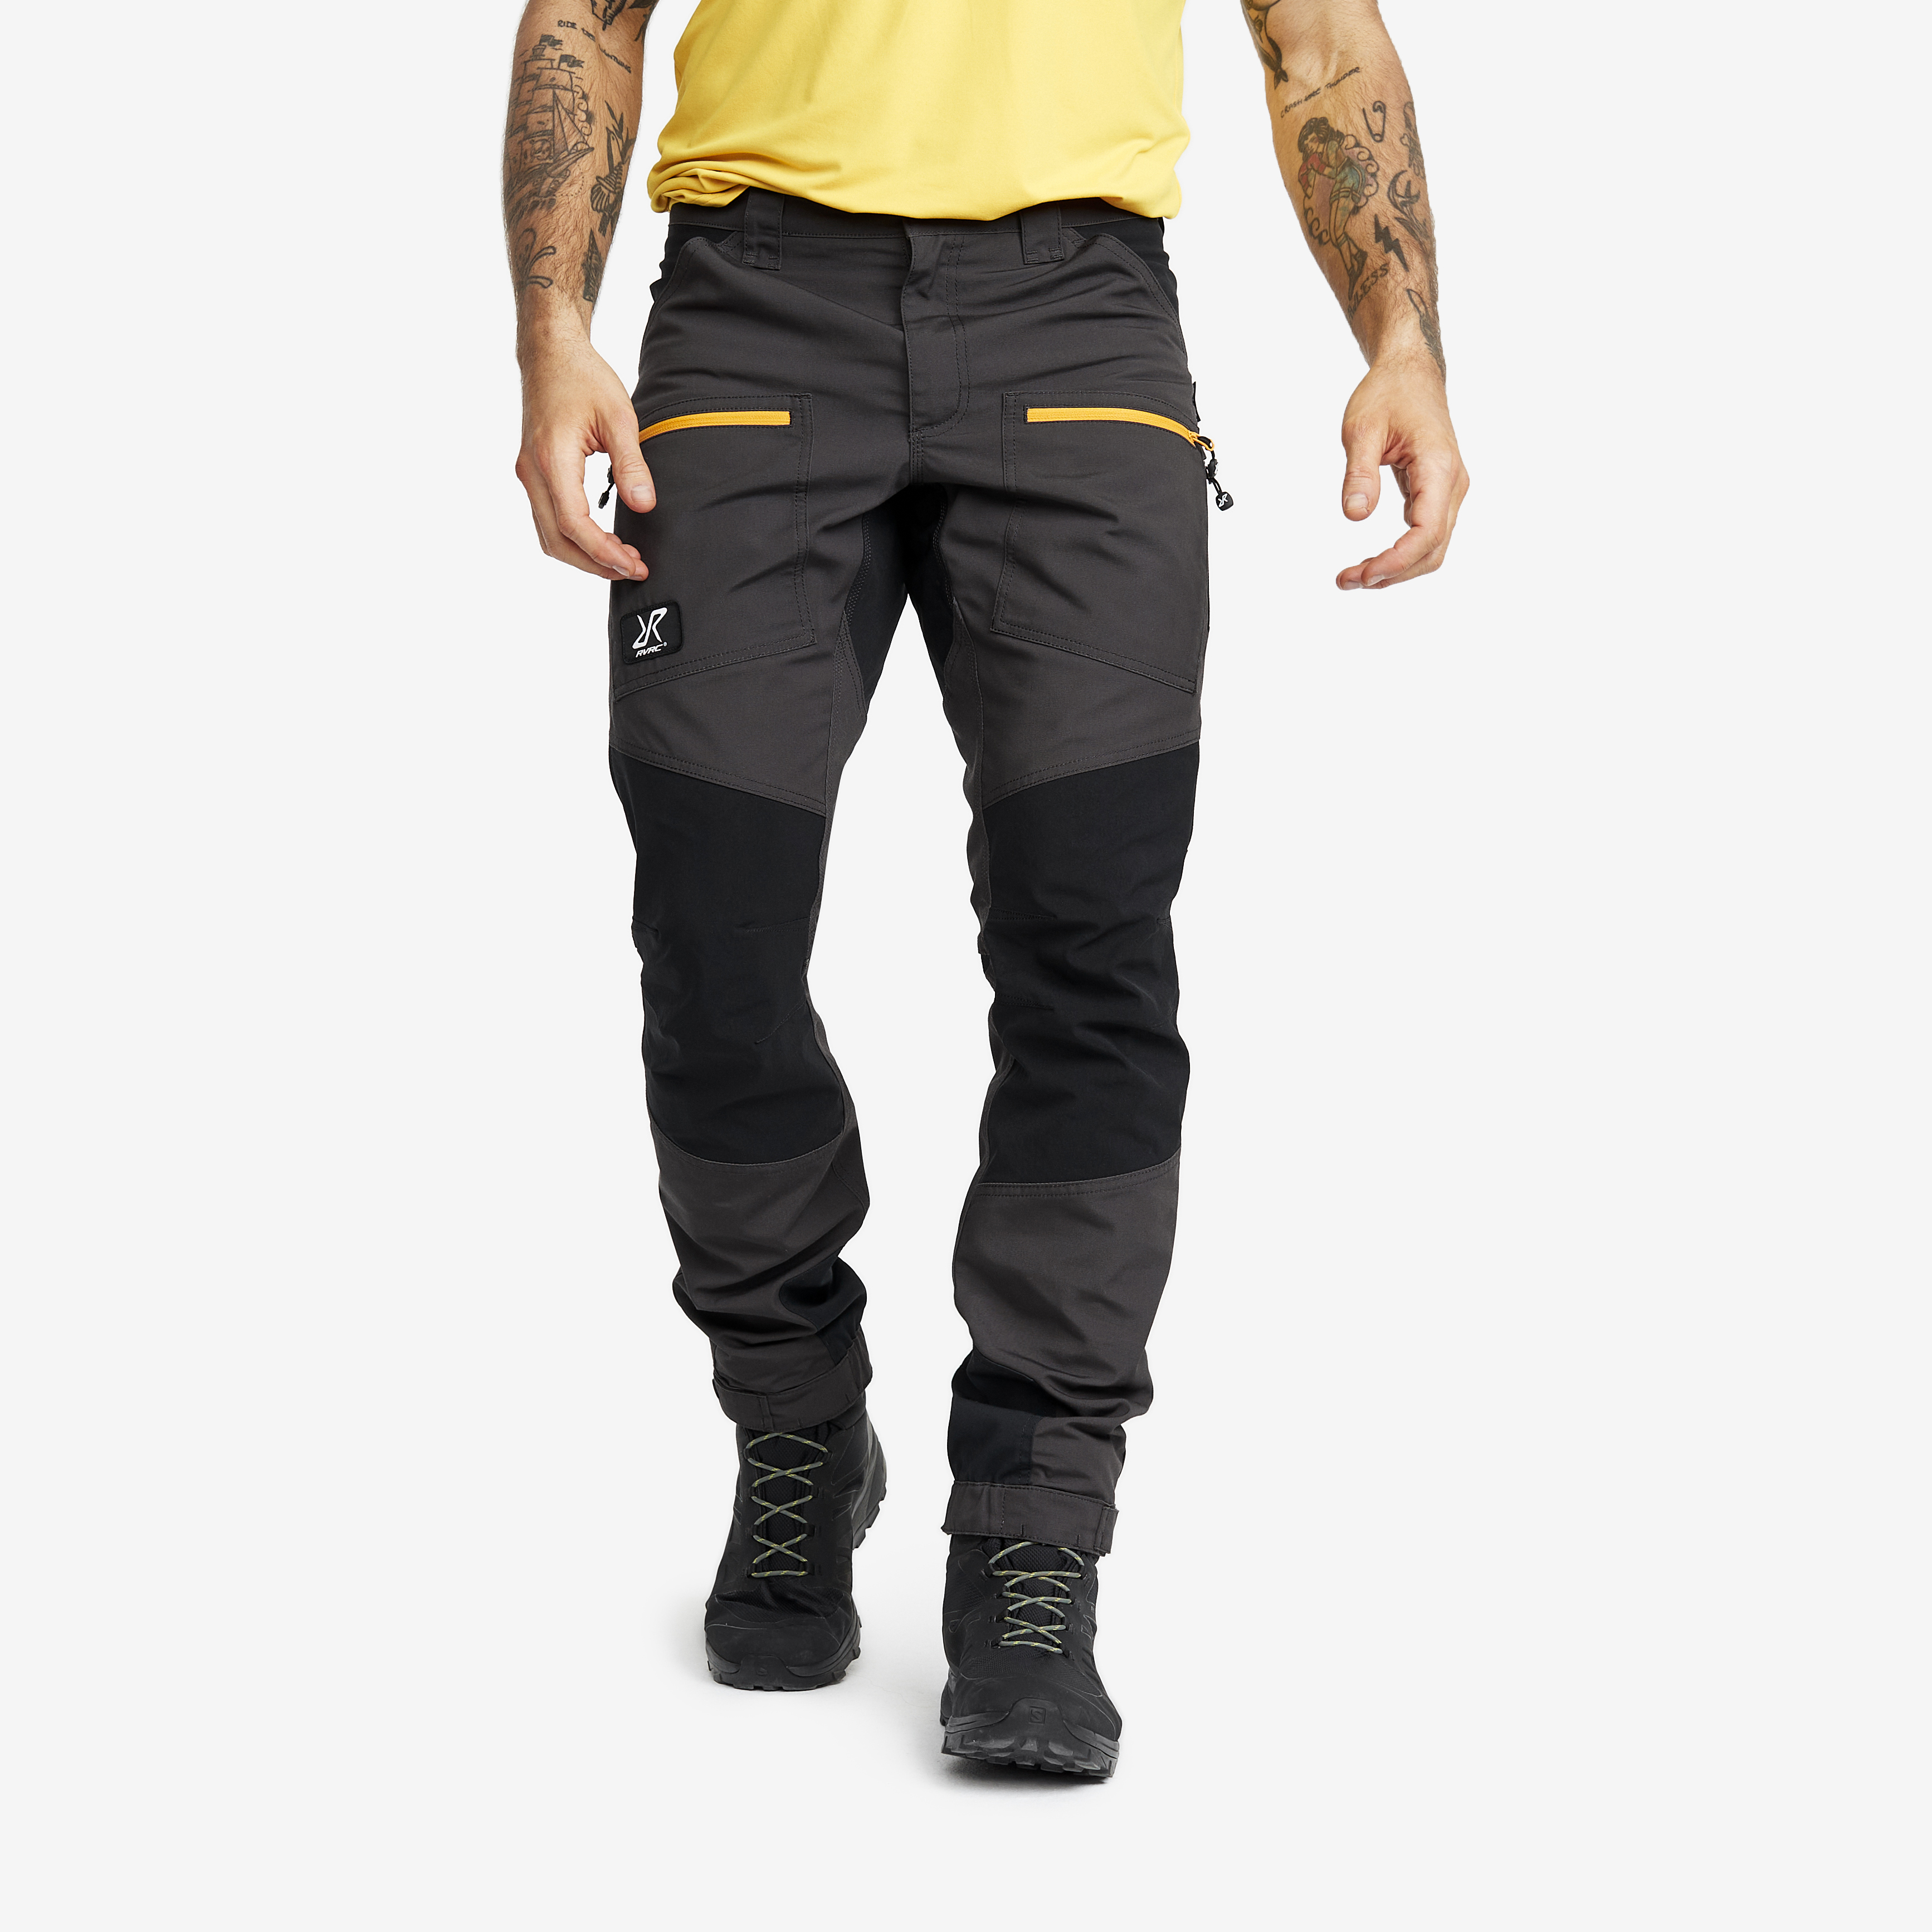 Nordwand Pro Pants Anthracite/Radiant Yellow Herren